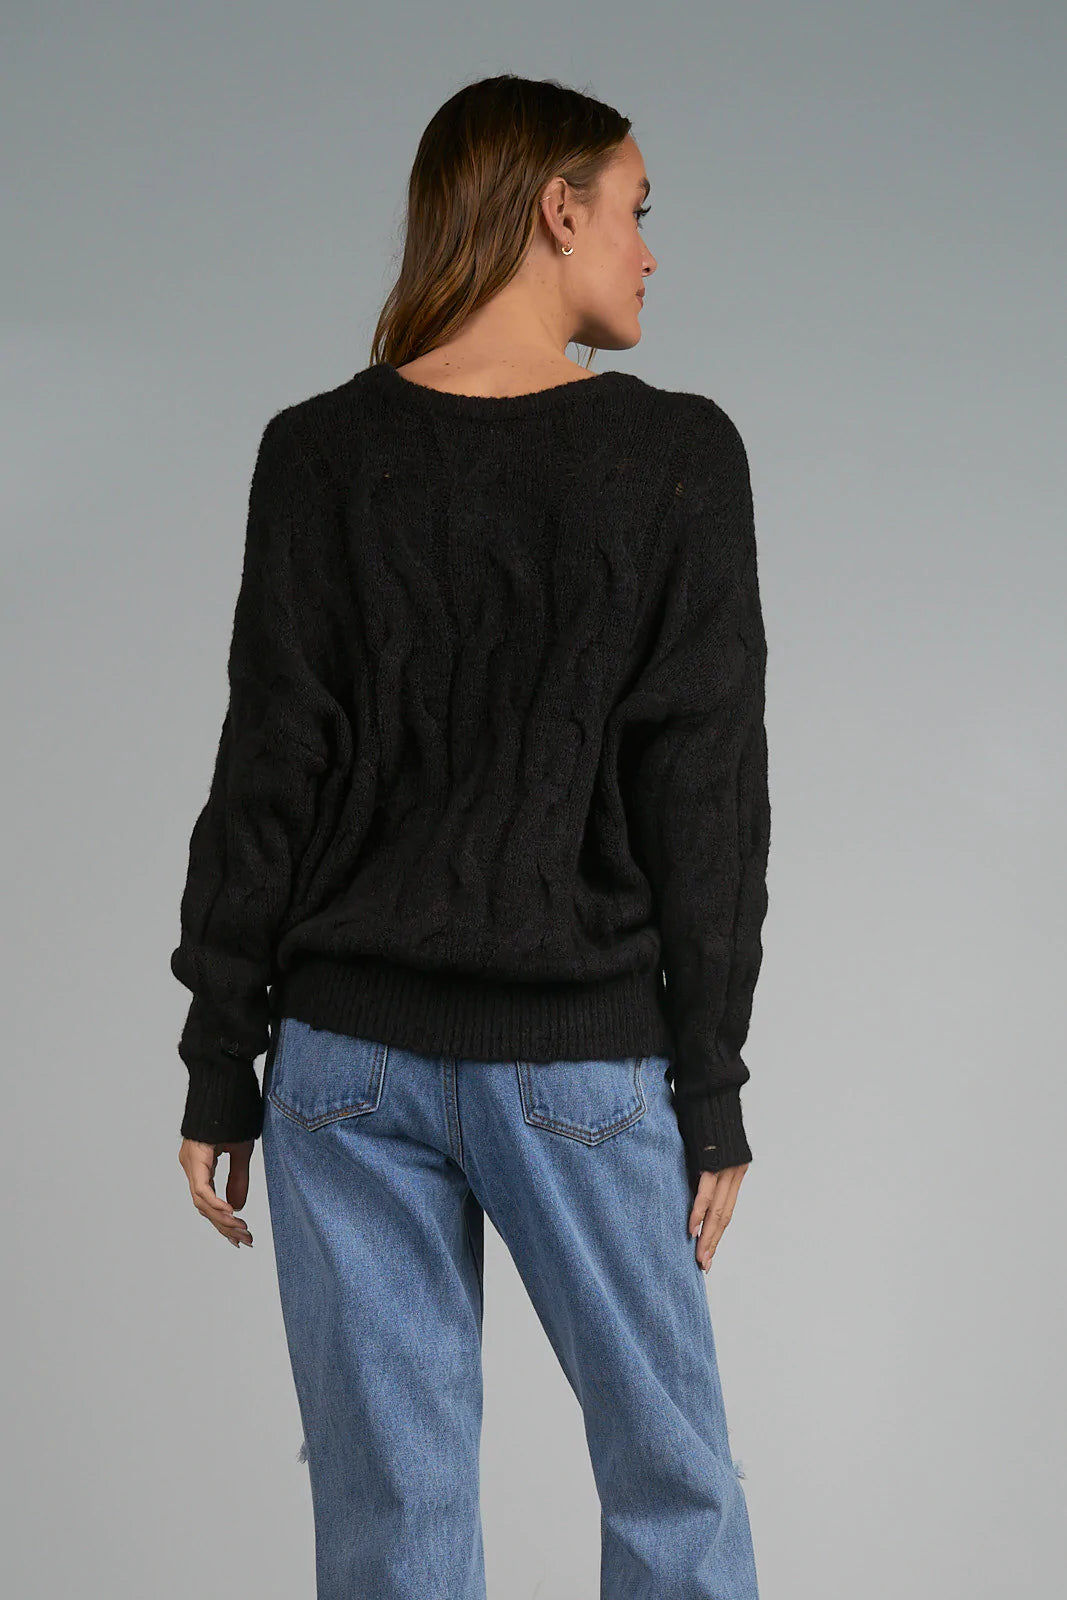 Elan Jolly Black Cable Knit Sweater